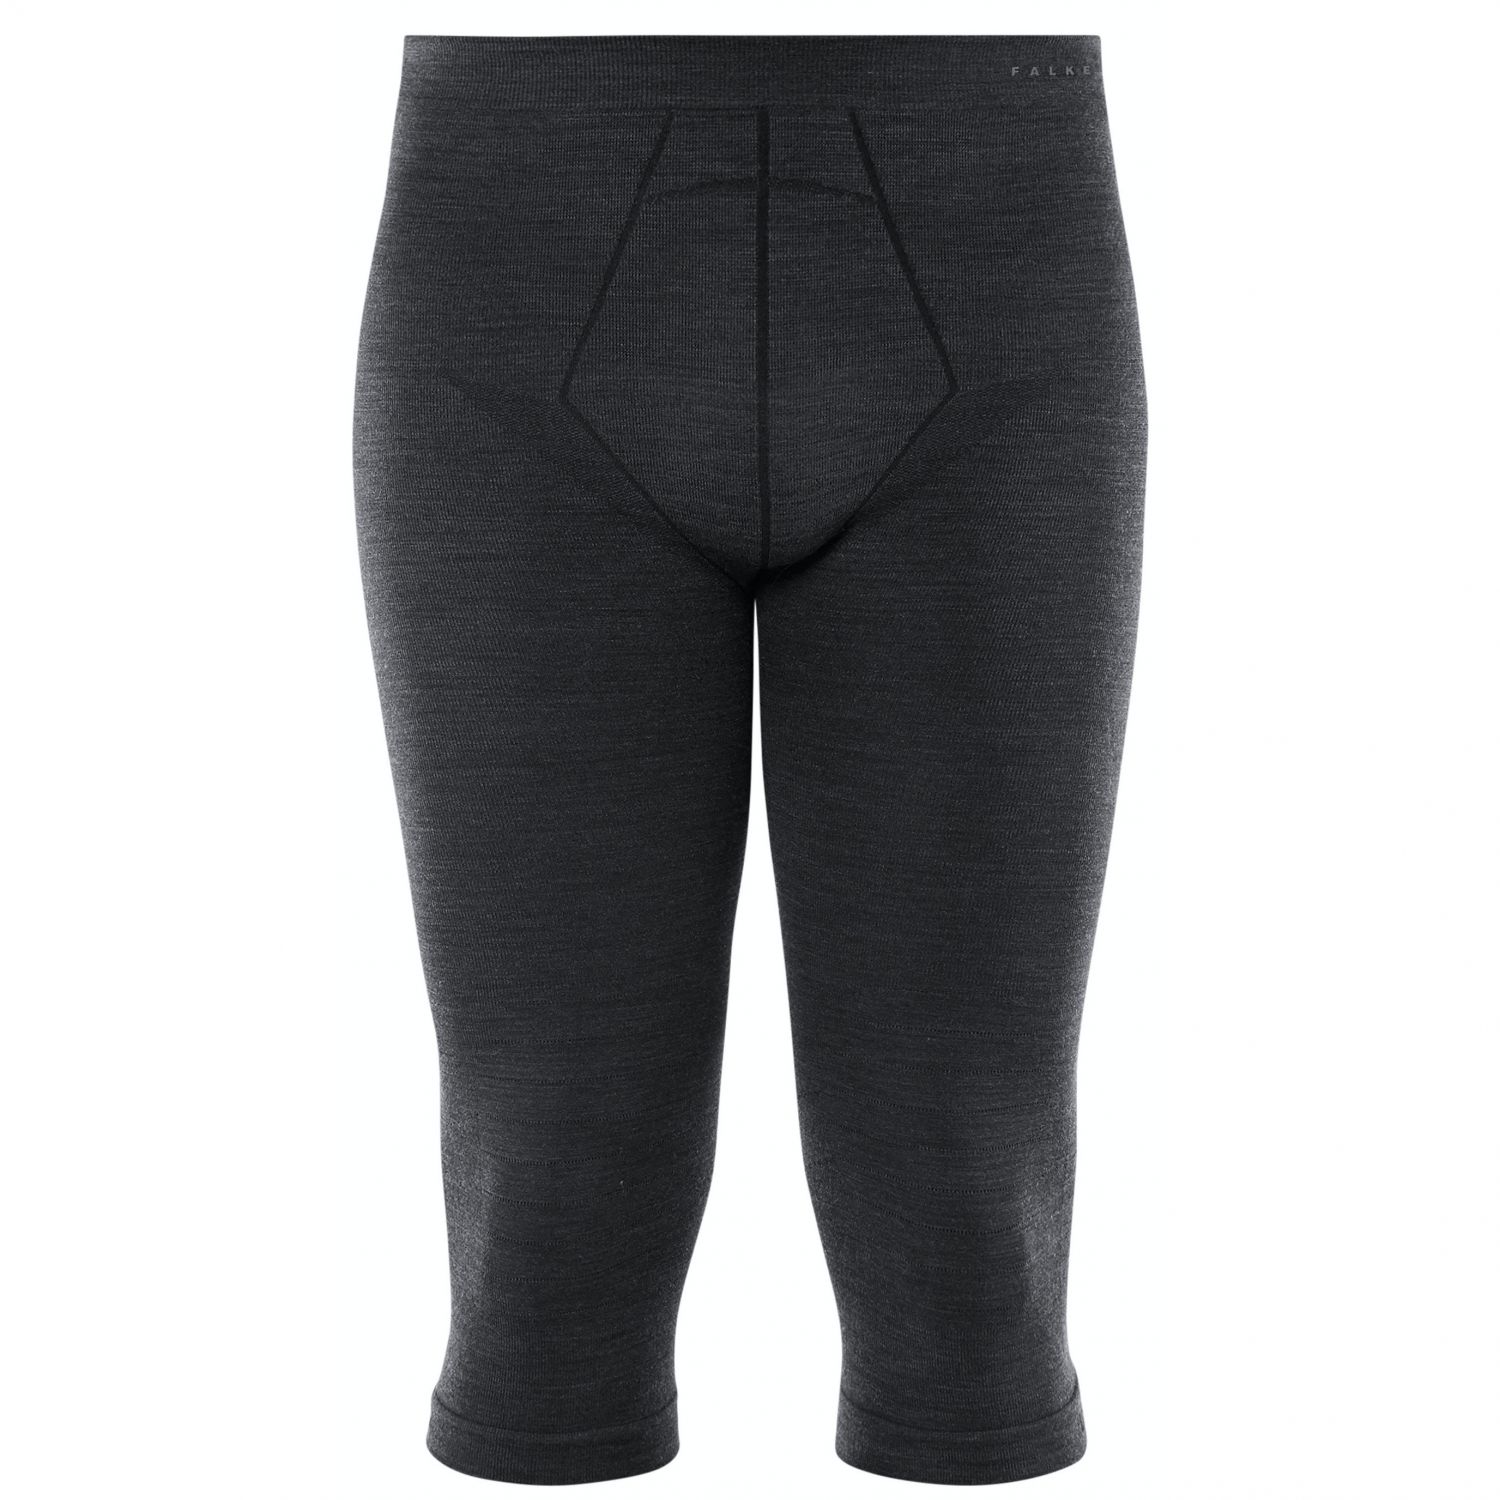 Details about   Falke Wool-tech 3/4 Tights Mens Base Layer Leggings Dark Night All Sizes 